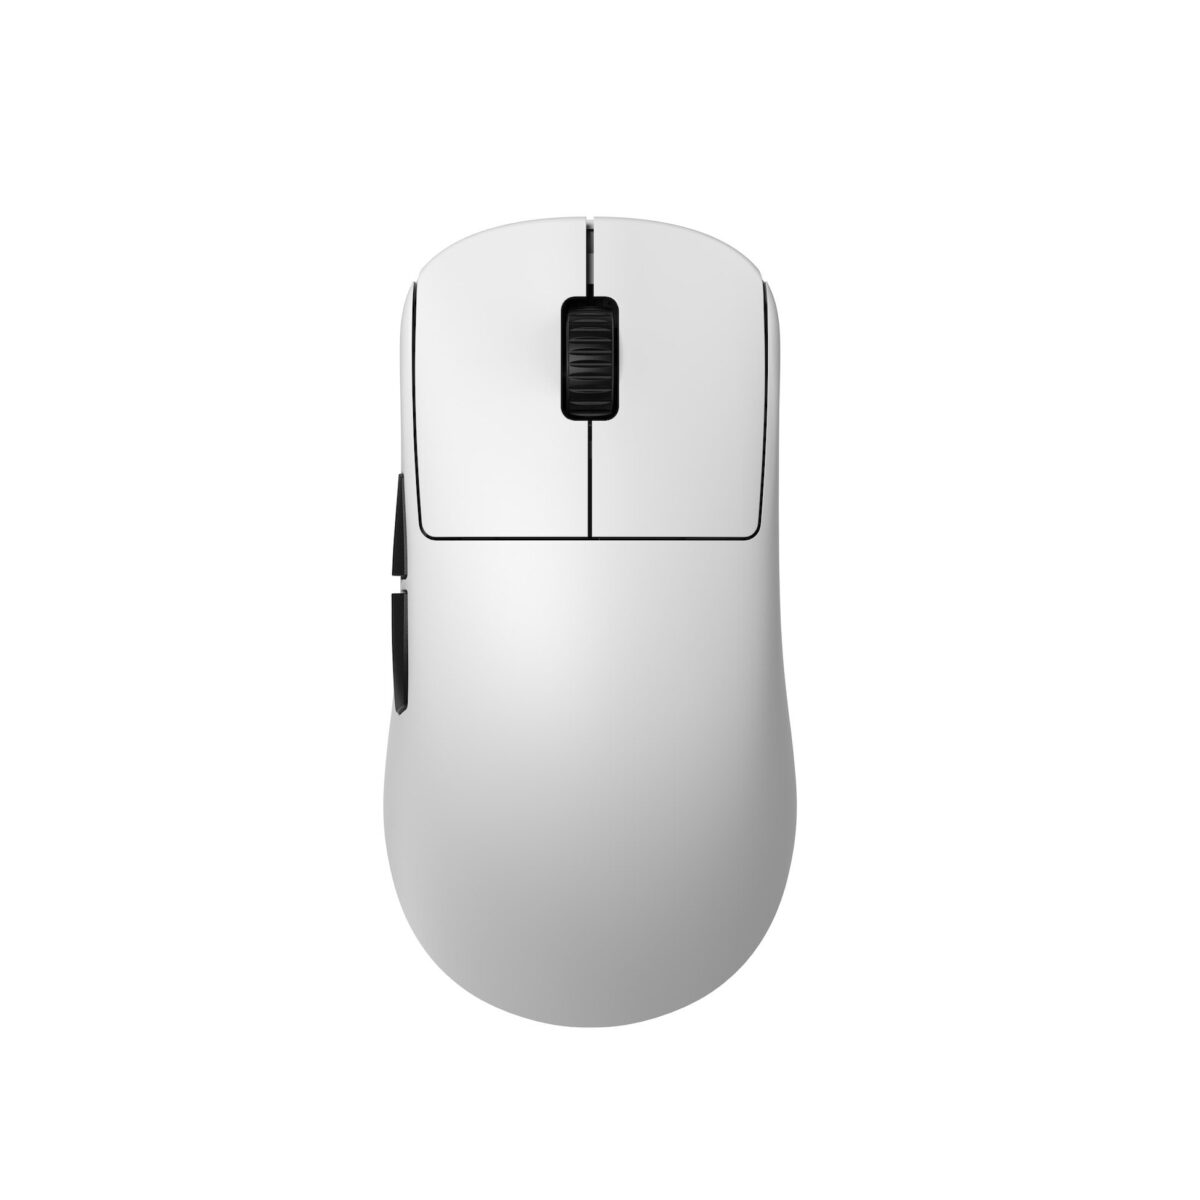 Endgame Gear OP1we Wireless Gaming Mouse - white - Pro GamersWare 1.28.63.12.012